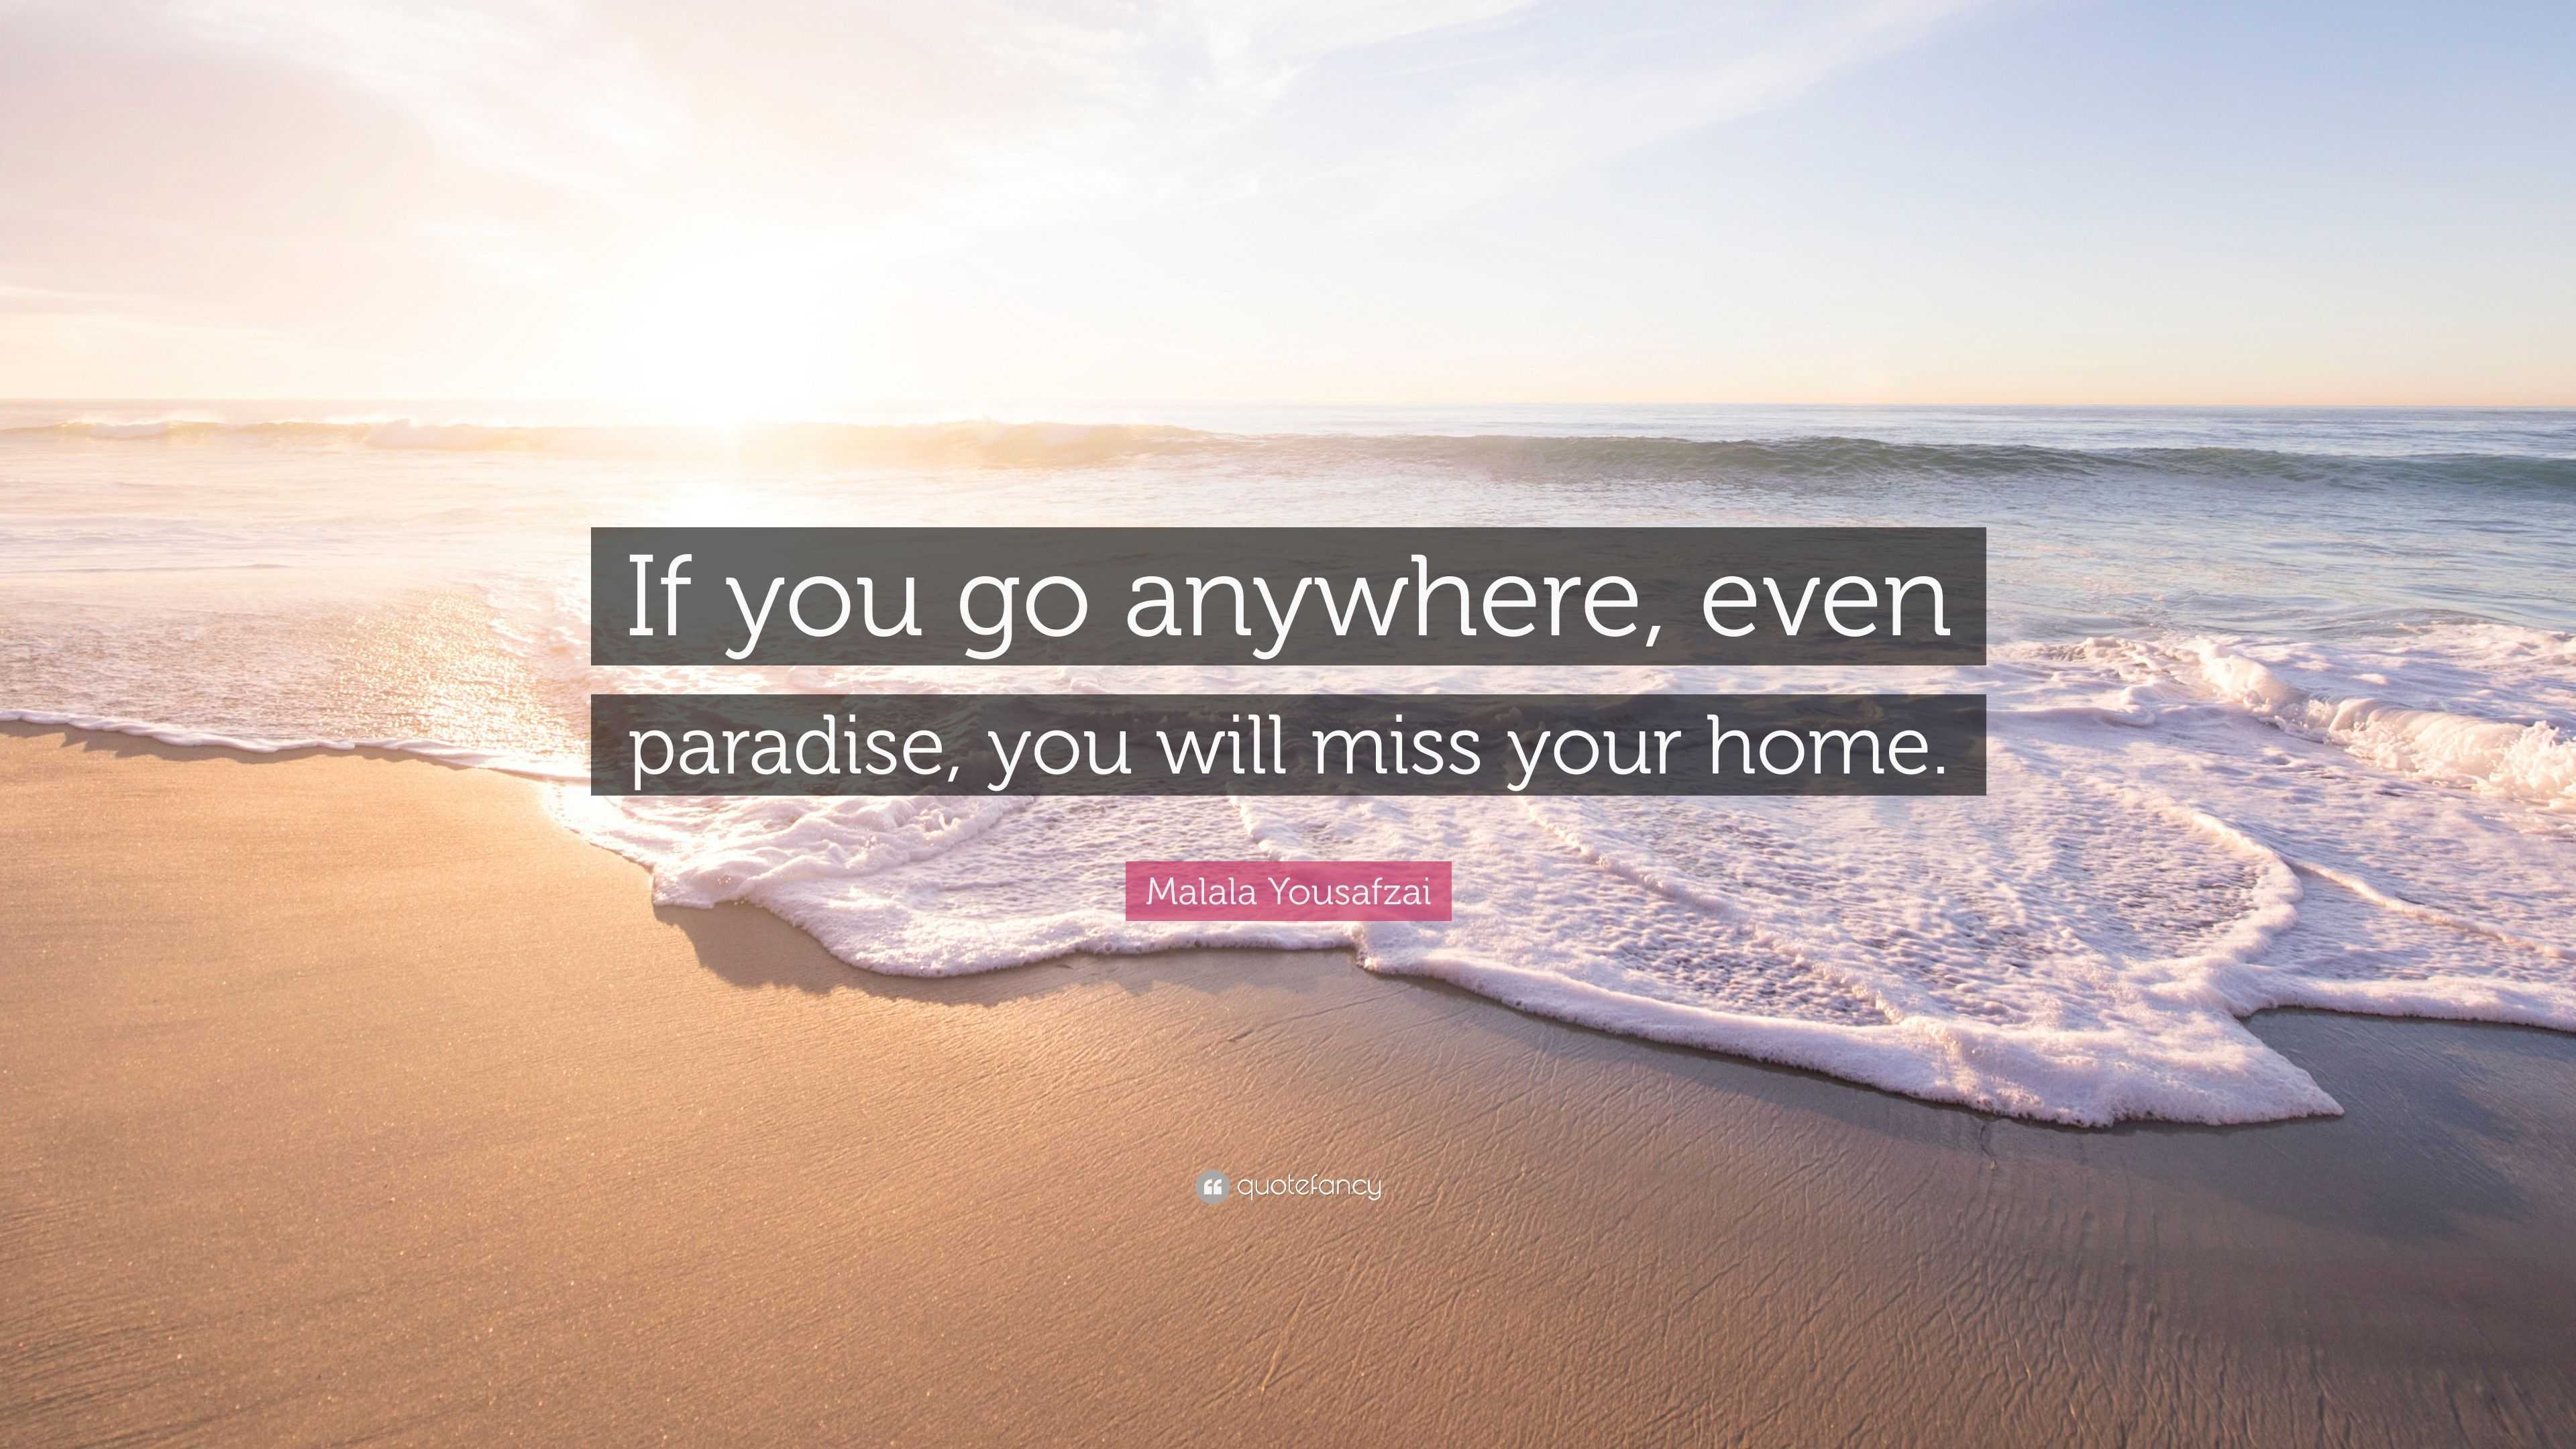 Malala Yousafzai Quote: “If you go anywhere, even paradise, you will ... I Miss Home Quotes